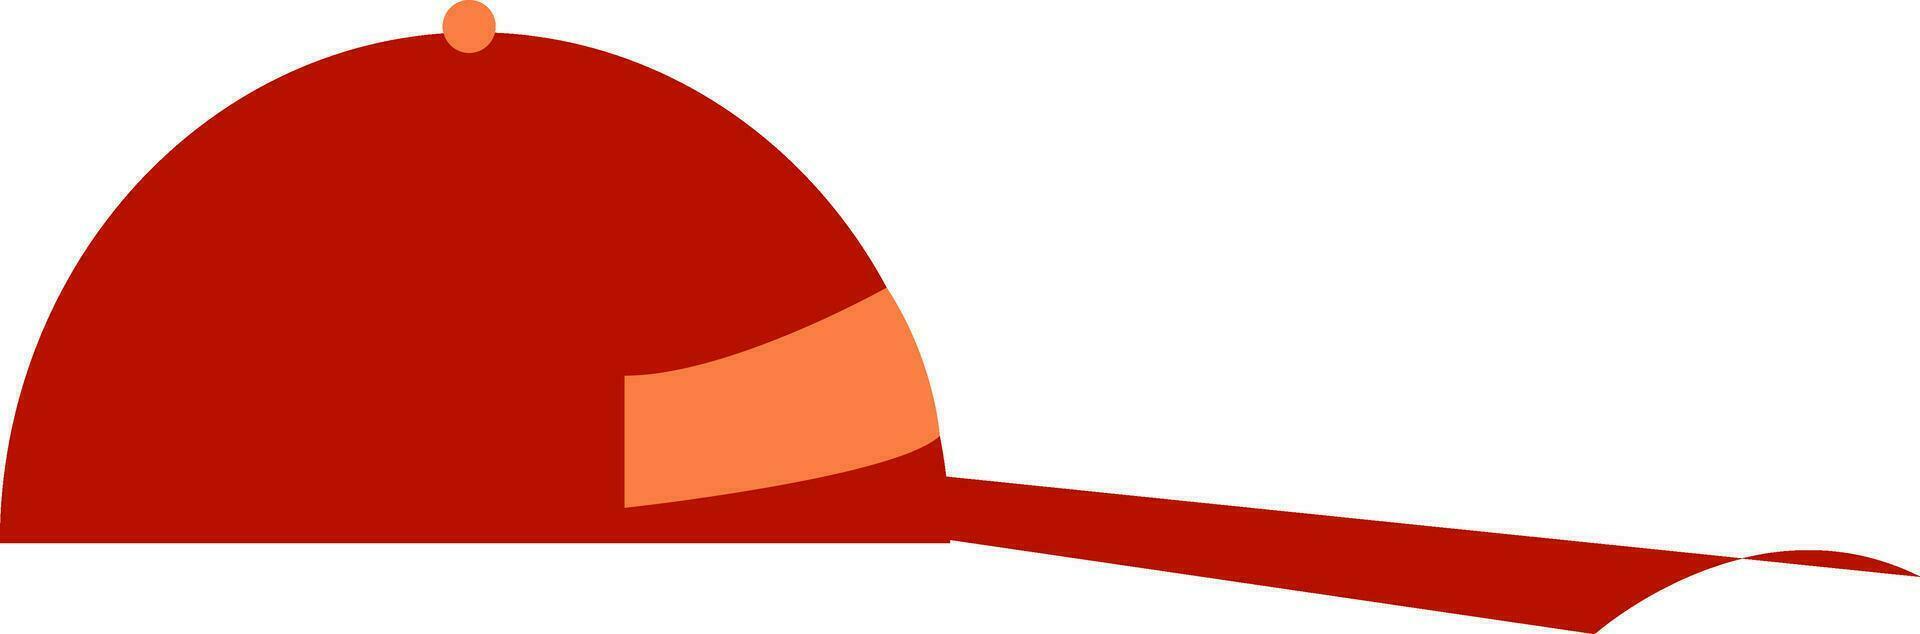 A red colored cap vector or color illustration